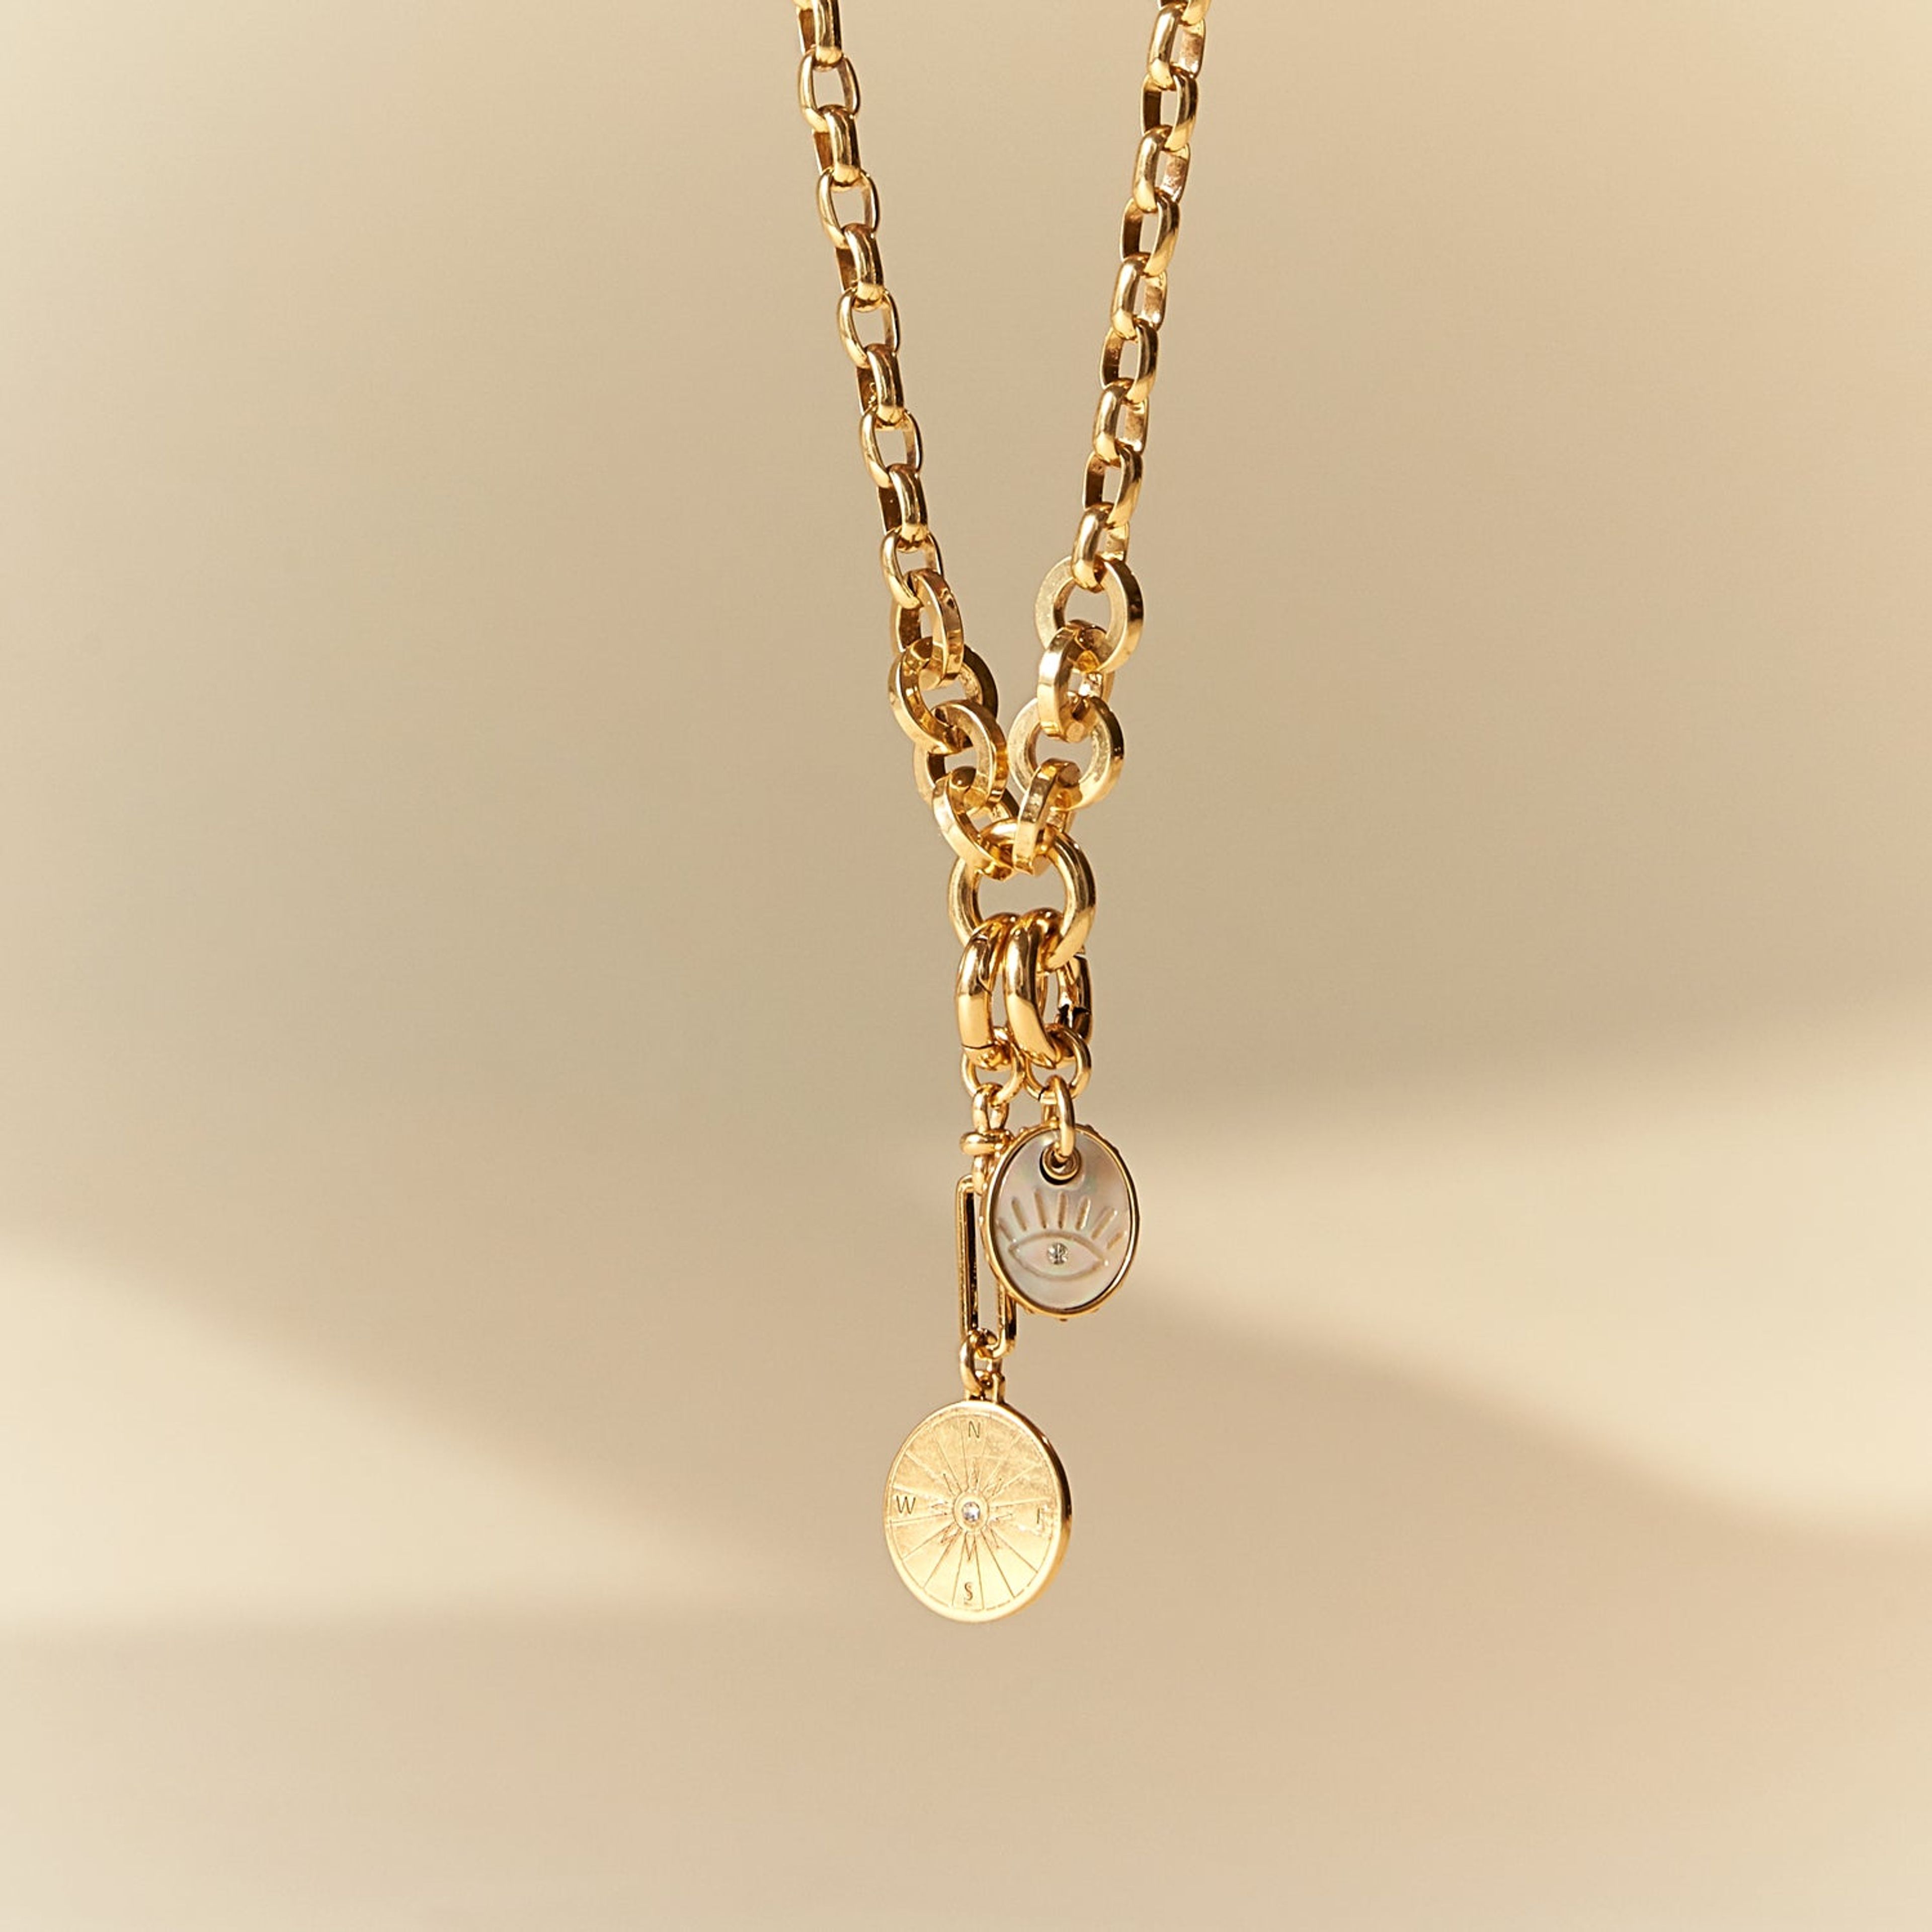 Voyager Gold Necklace